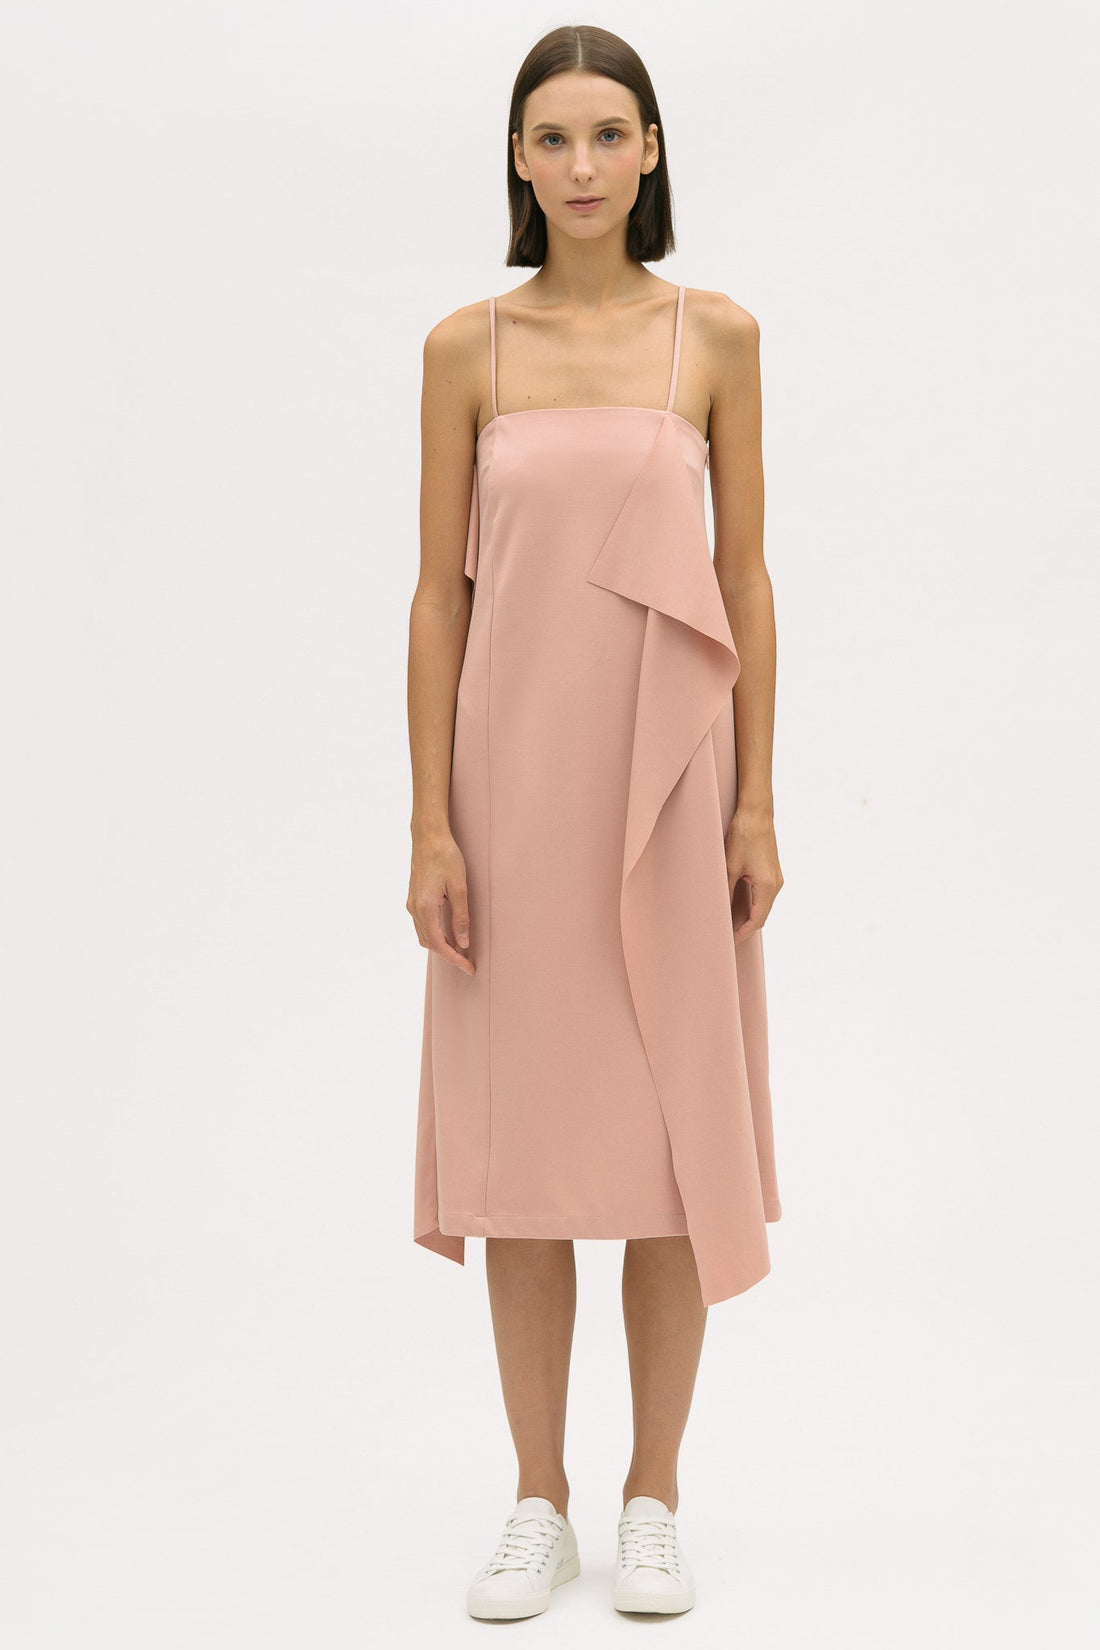 A woman is wearing a pink slip dress with ruffles. She also has white tennis shoes on.